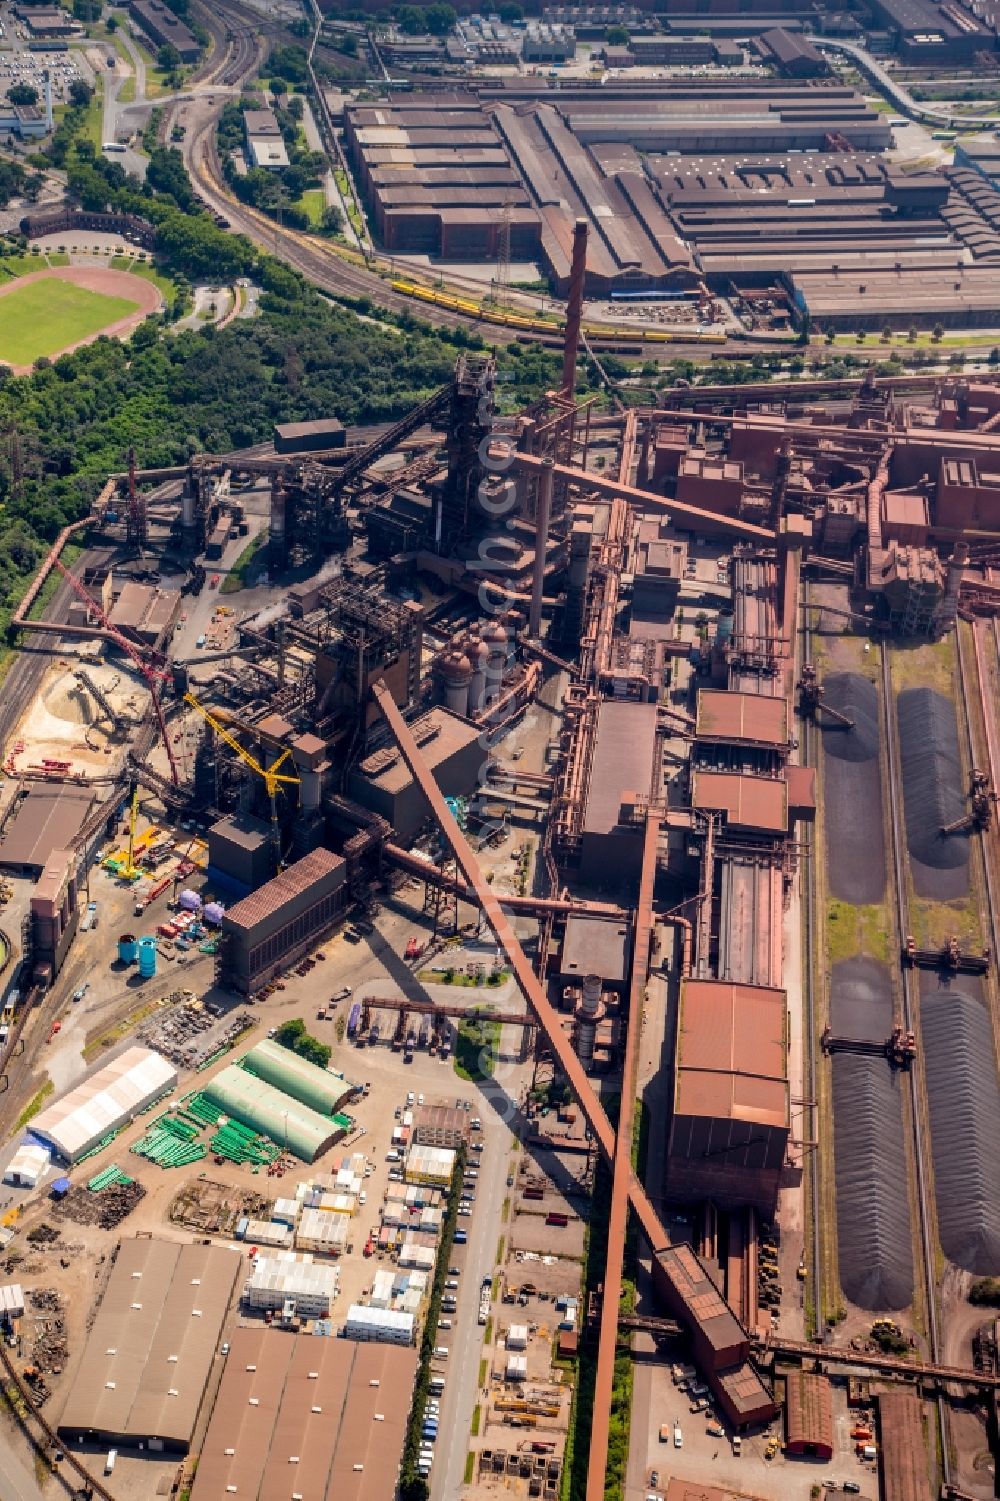 Duisburg from the bird's eye view: Technical equipment and production facilities of the steelworks Huettenwerke Krupp Mannesmann GmbH in Duisburg in the state North Rhine-Westphalia